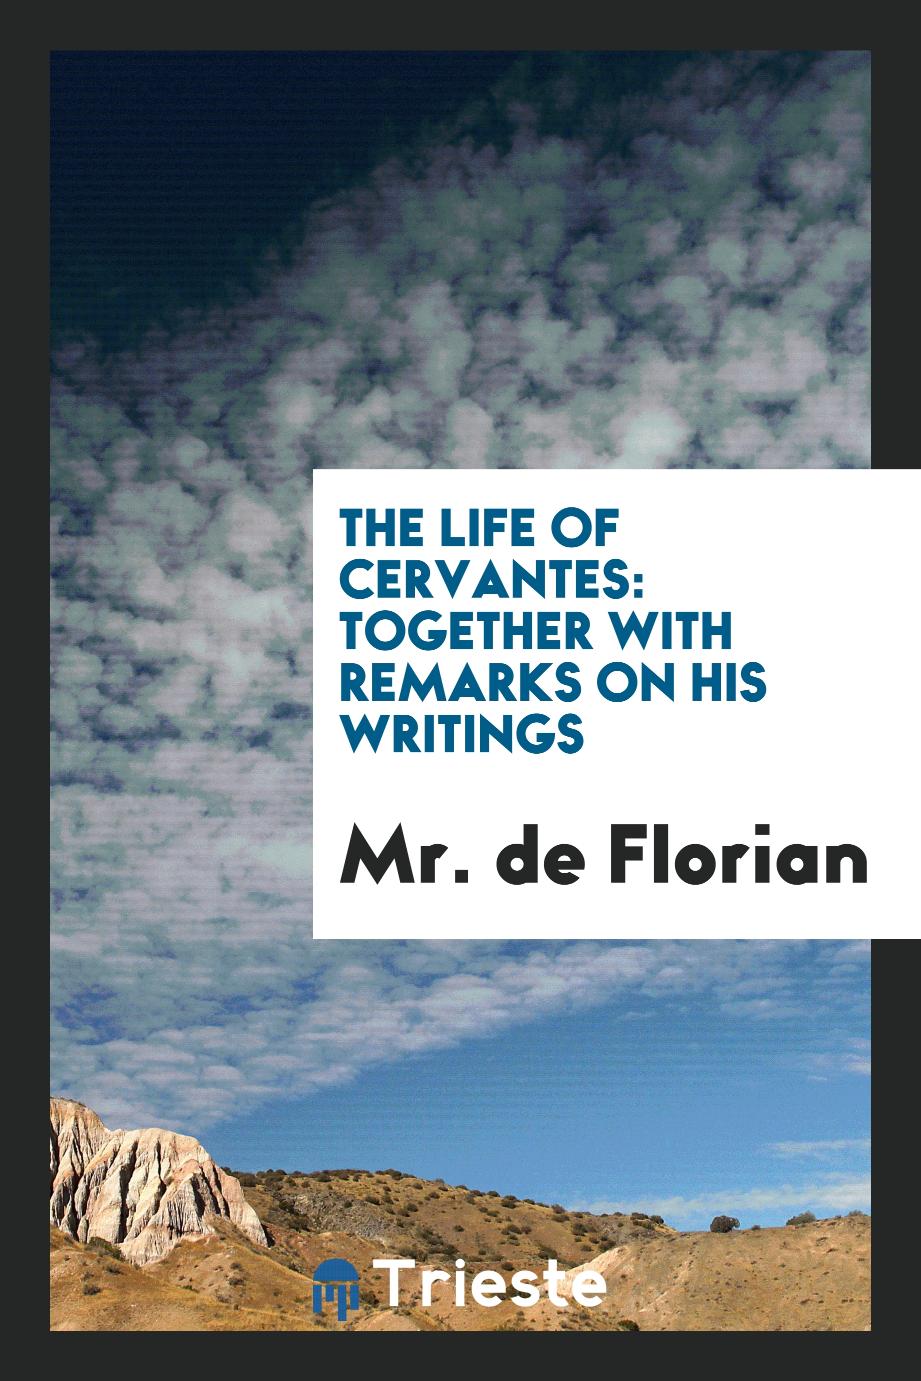 The life of Cervantes: together with remarks on his writings